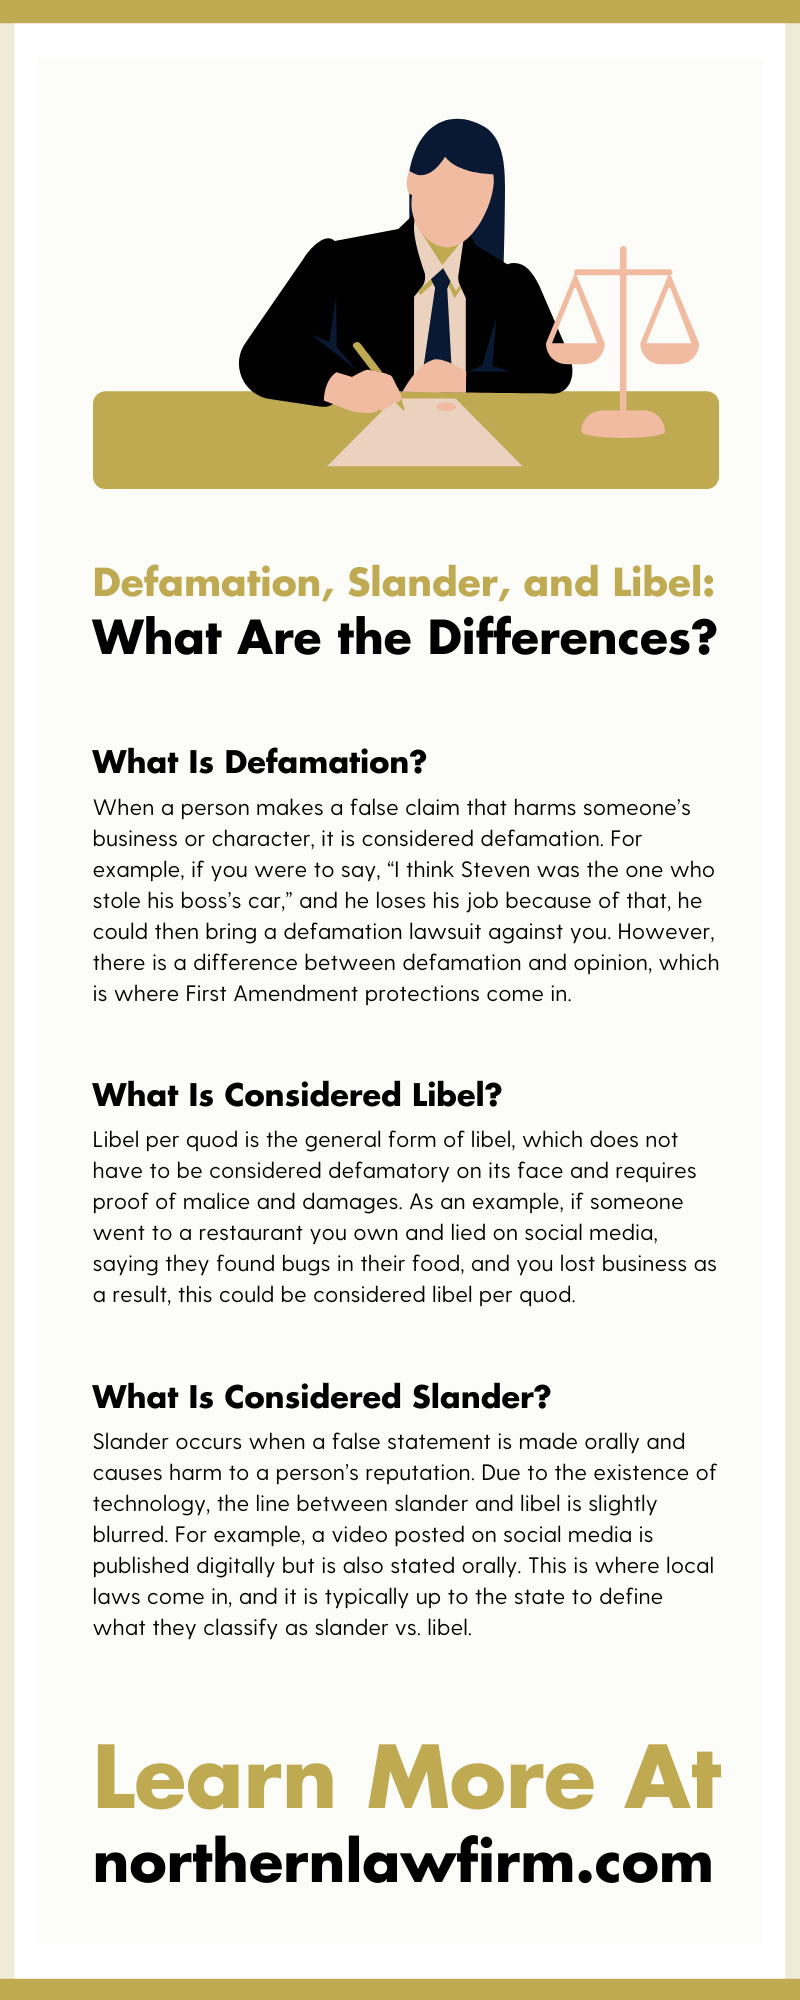 Defamation, Slander, and Libel: What Are the Differences?